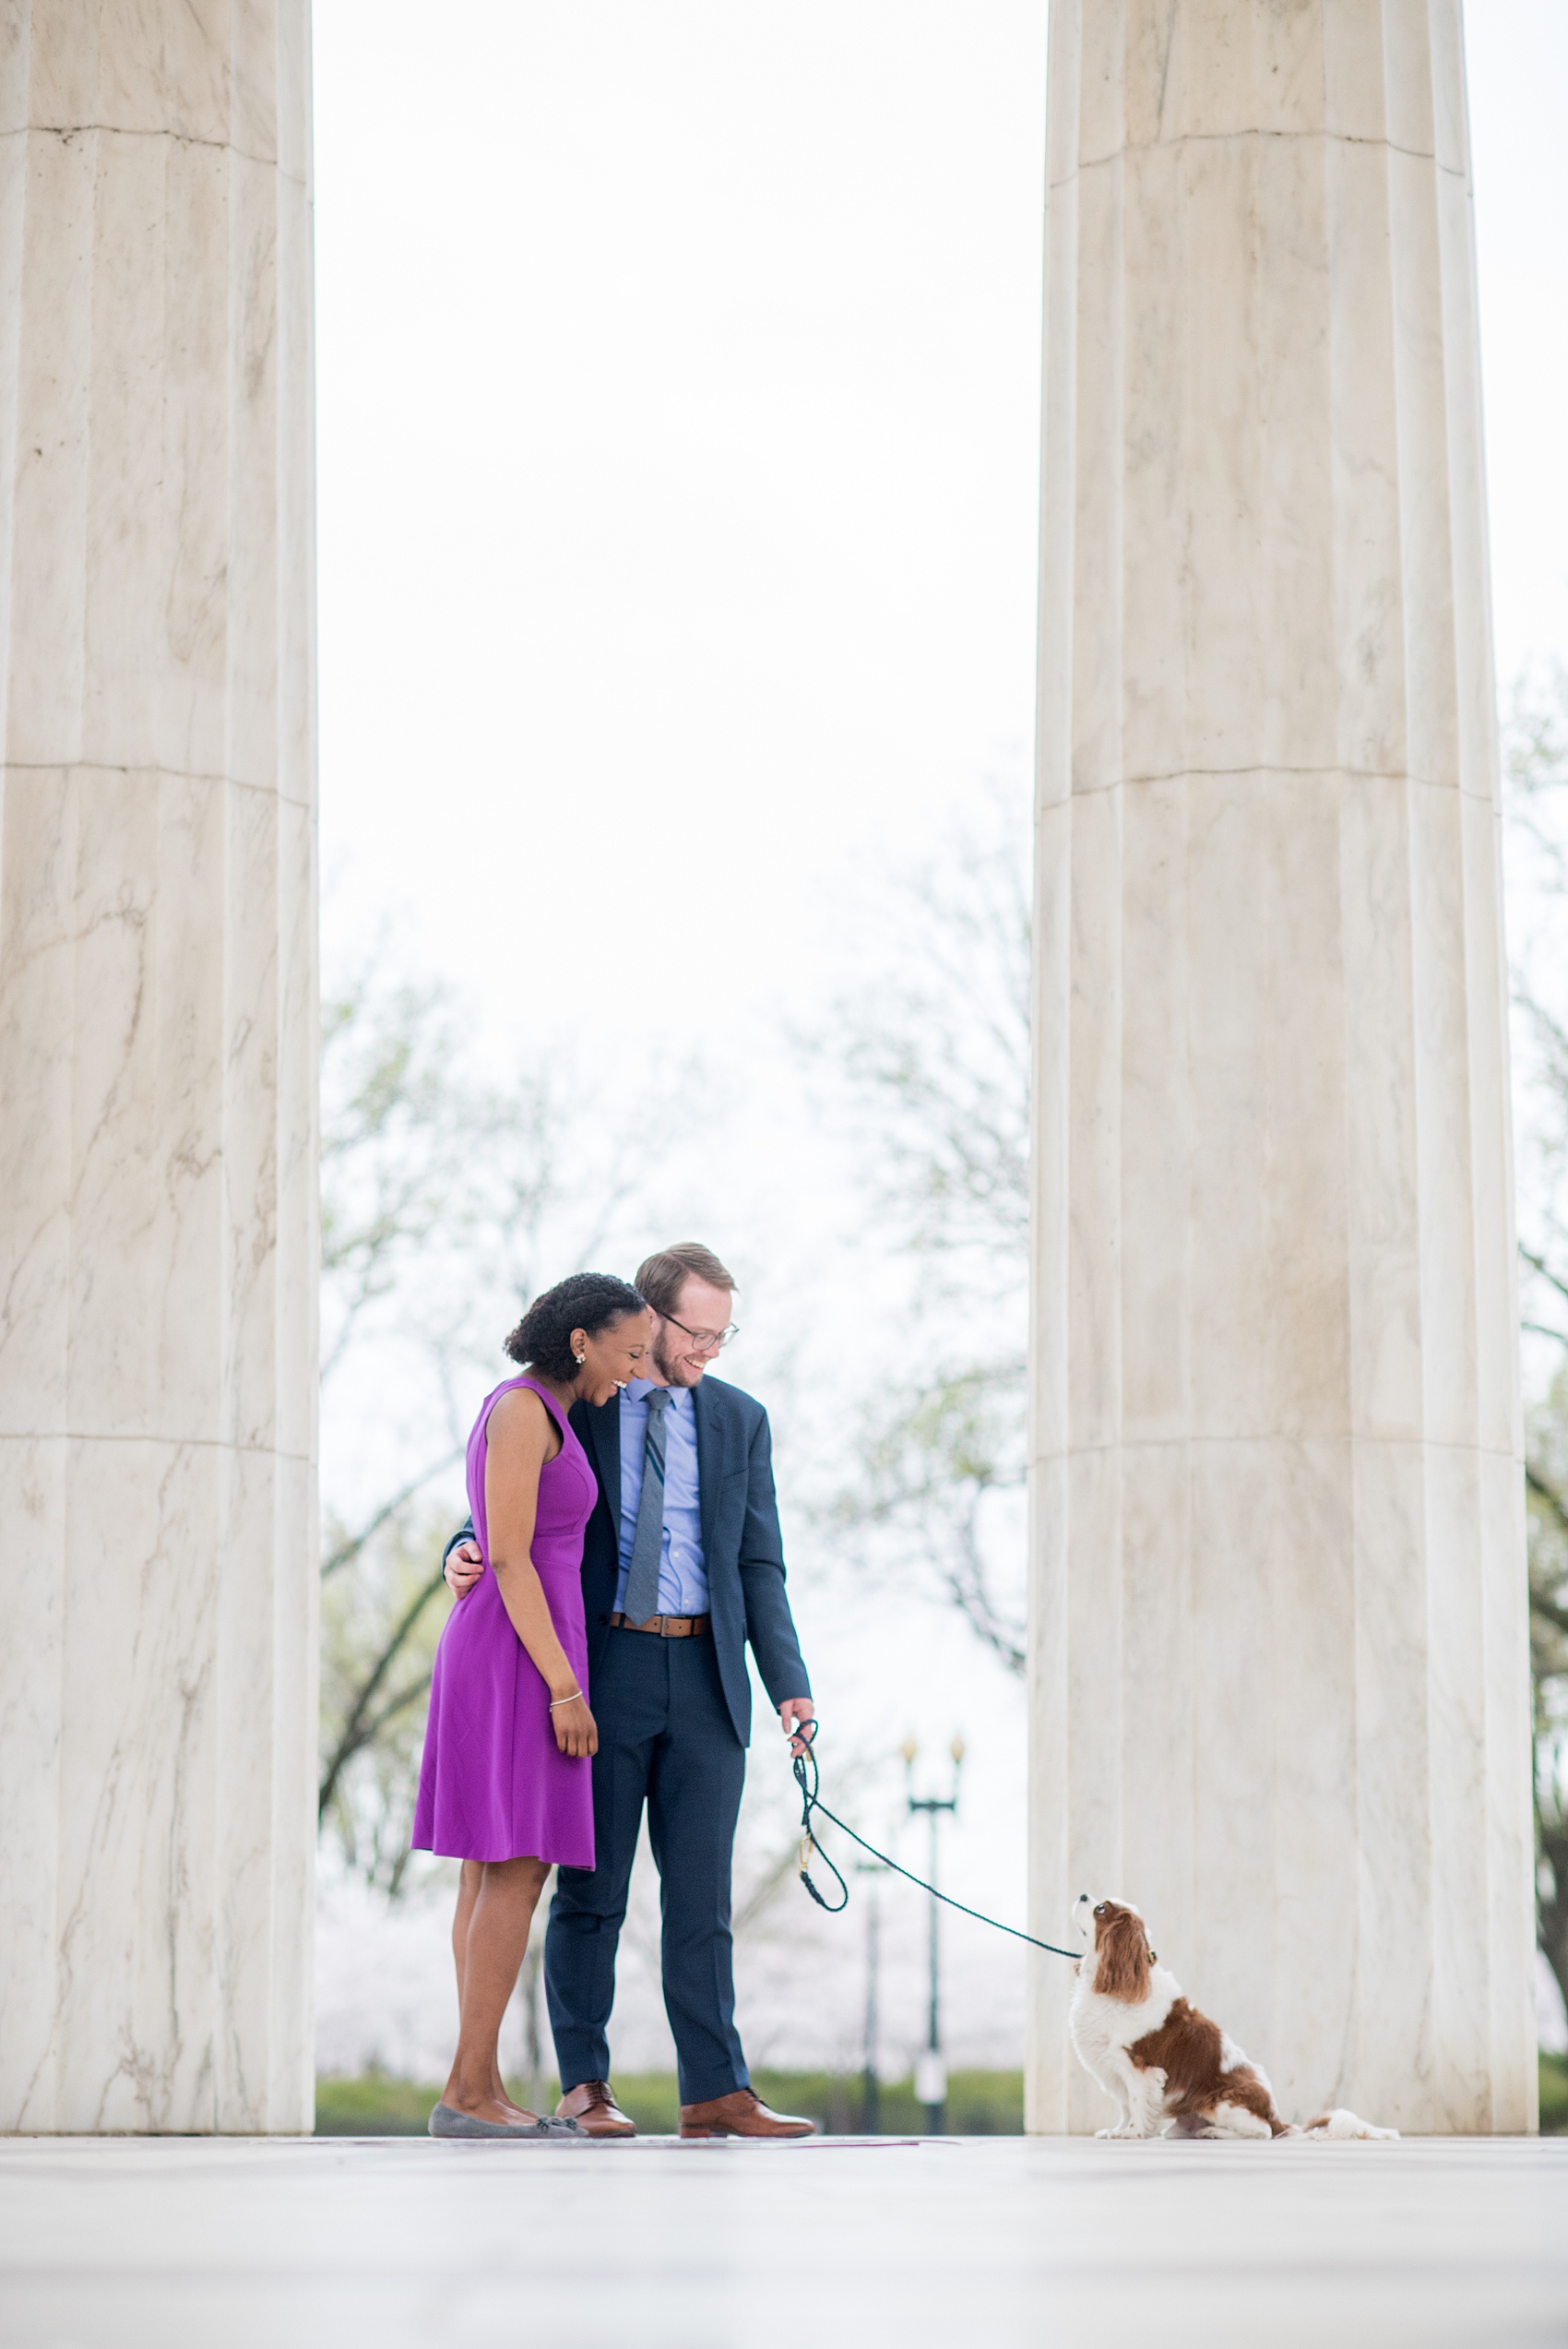 DC Cherry Blossoms Engagement Photos by Mikkel Paige Photography. Spring flowers around the MLK memorial and Tidal Basin at the nation's Capitol with a couple and their King Charles Spaniel dog. #DCCherryBlossoms #CherryBlossoms #EngagementPhotos #SpringEngagementPhotos #CherryBlossomsEngagementPhotos